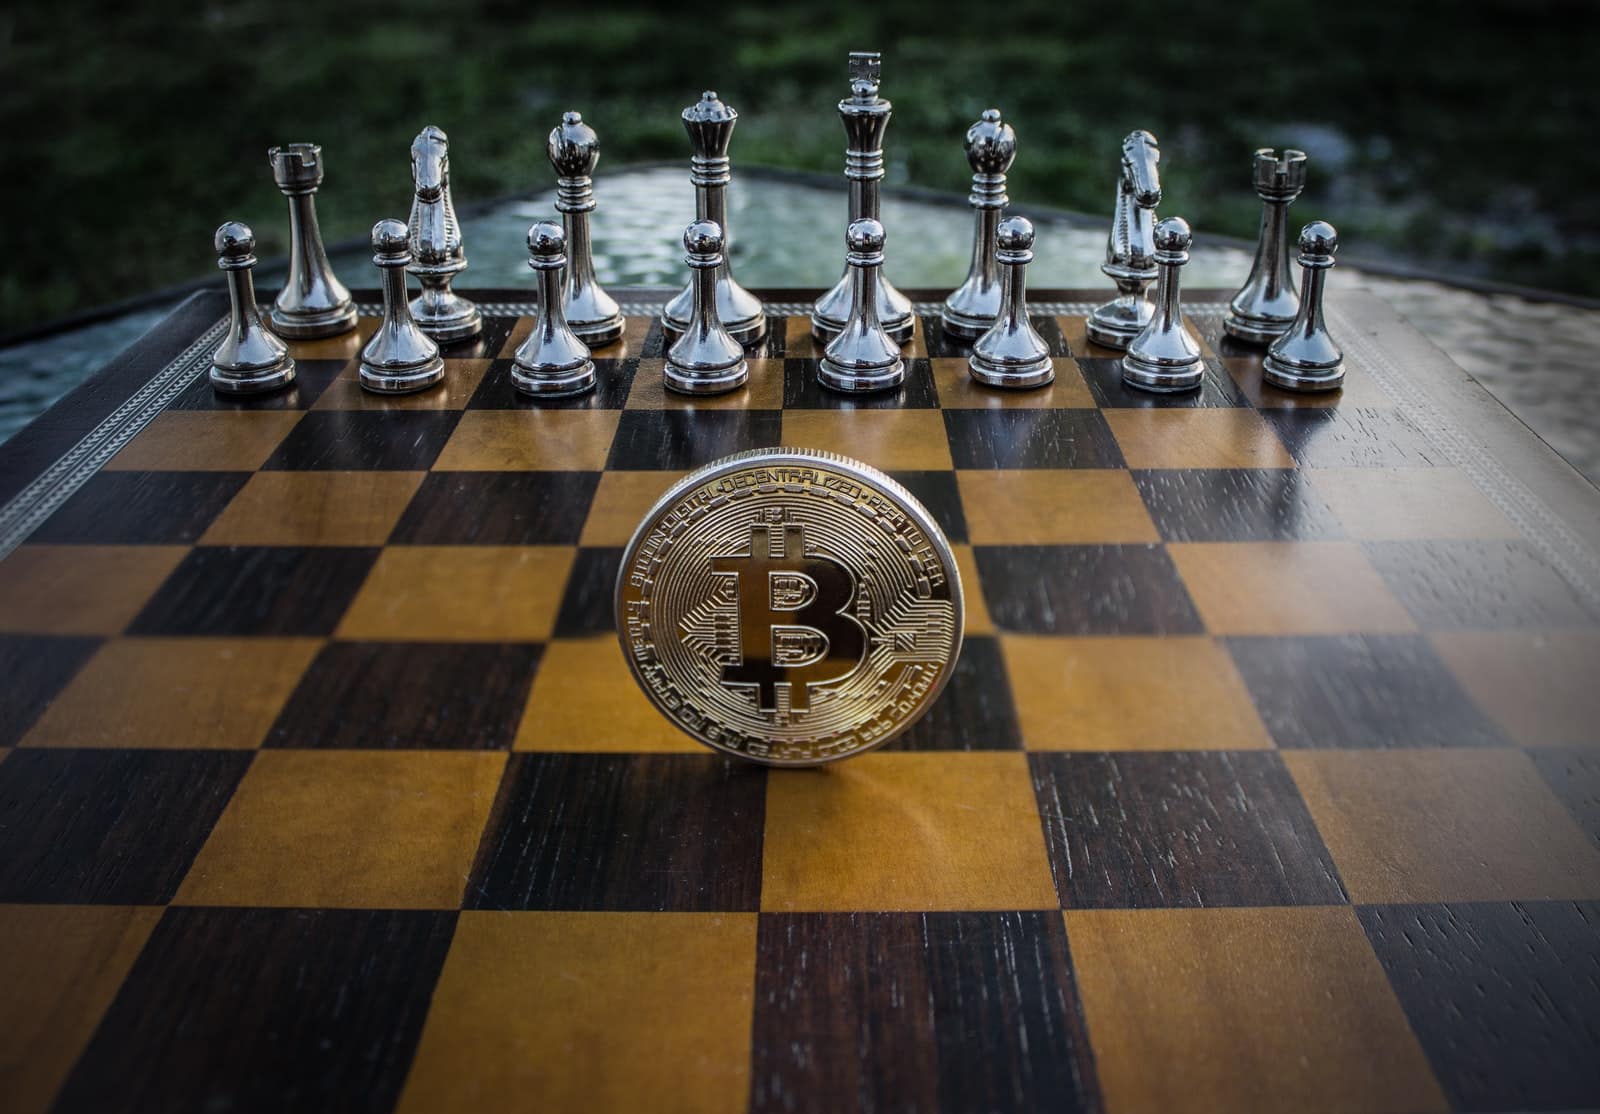 Close-up Photography of Coin on Chessboard